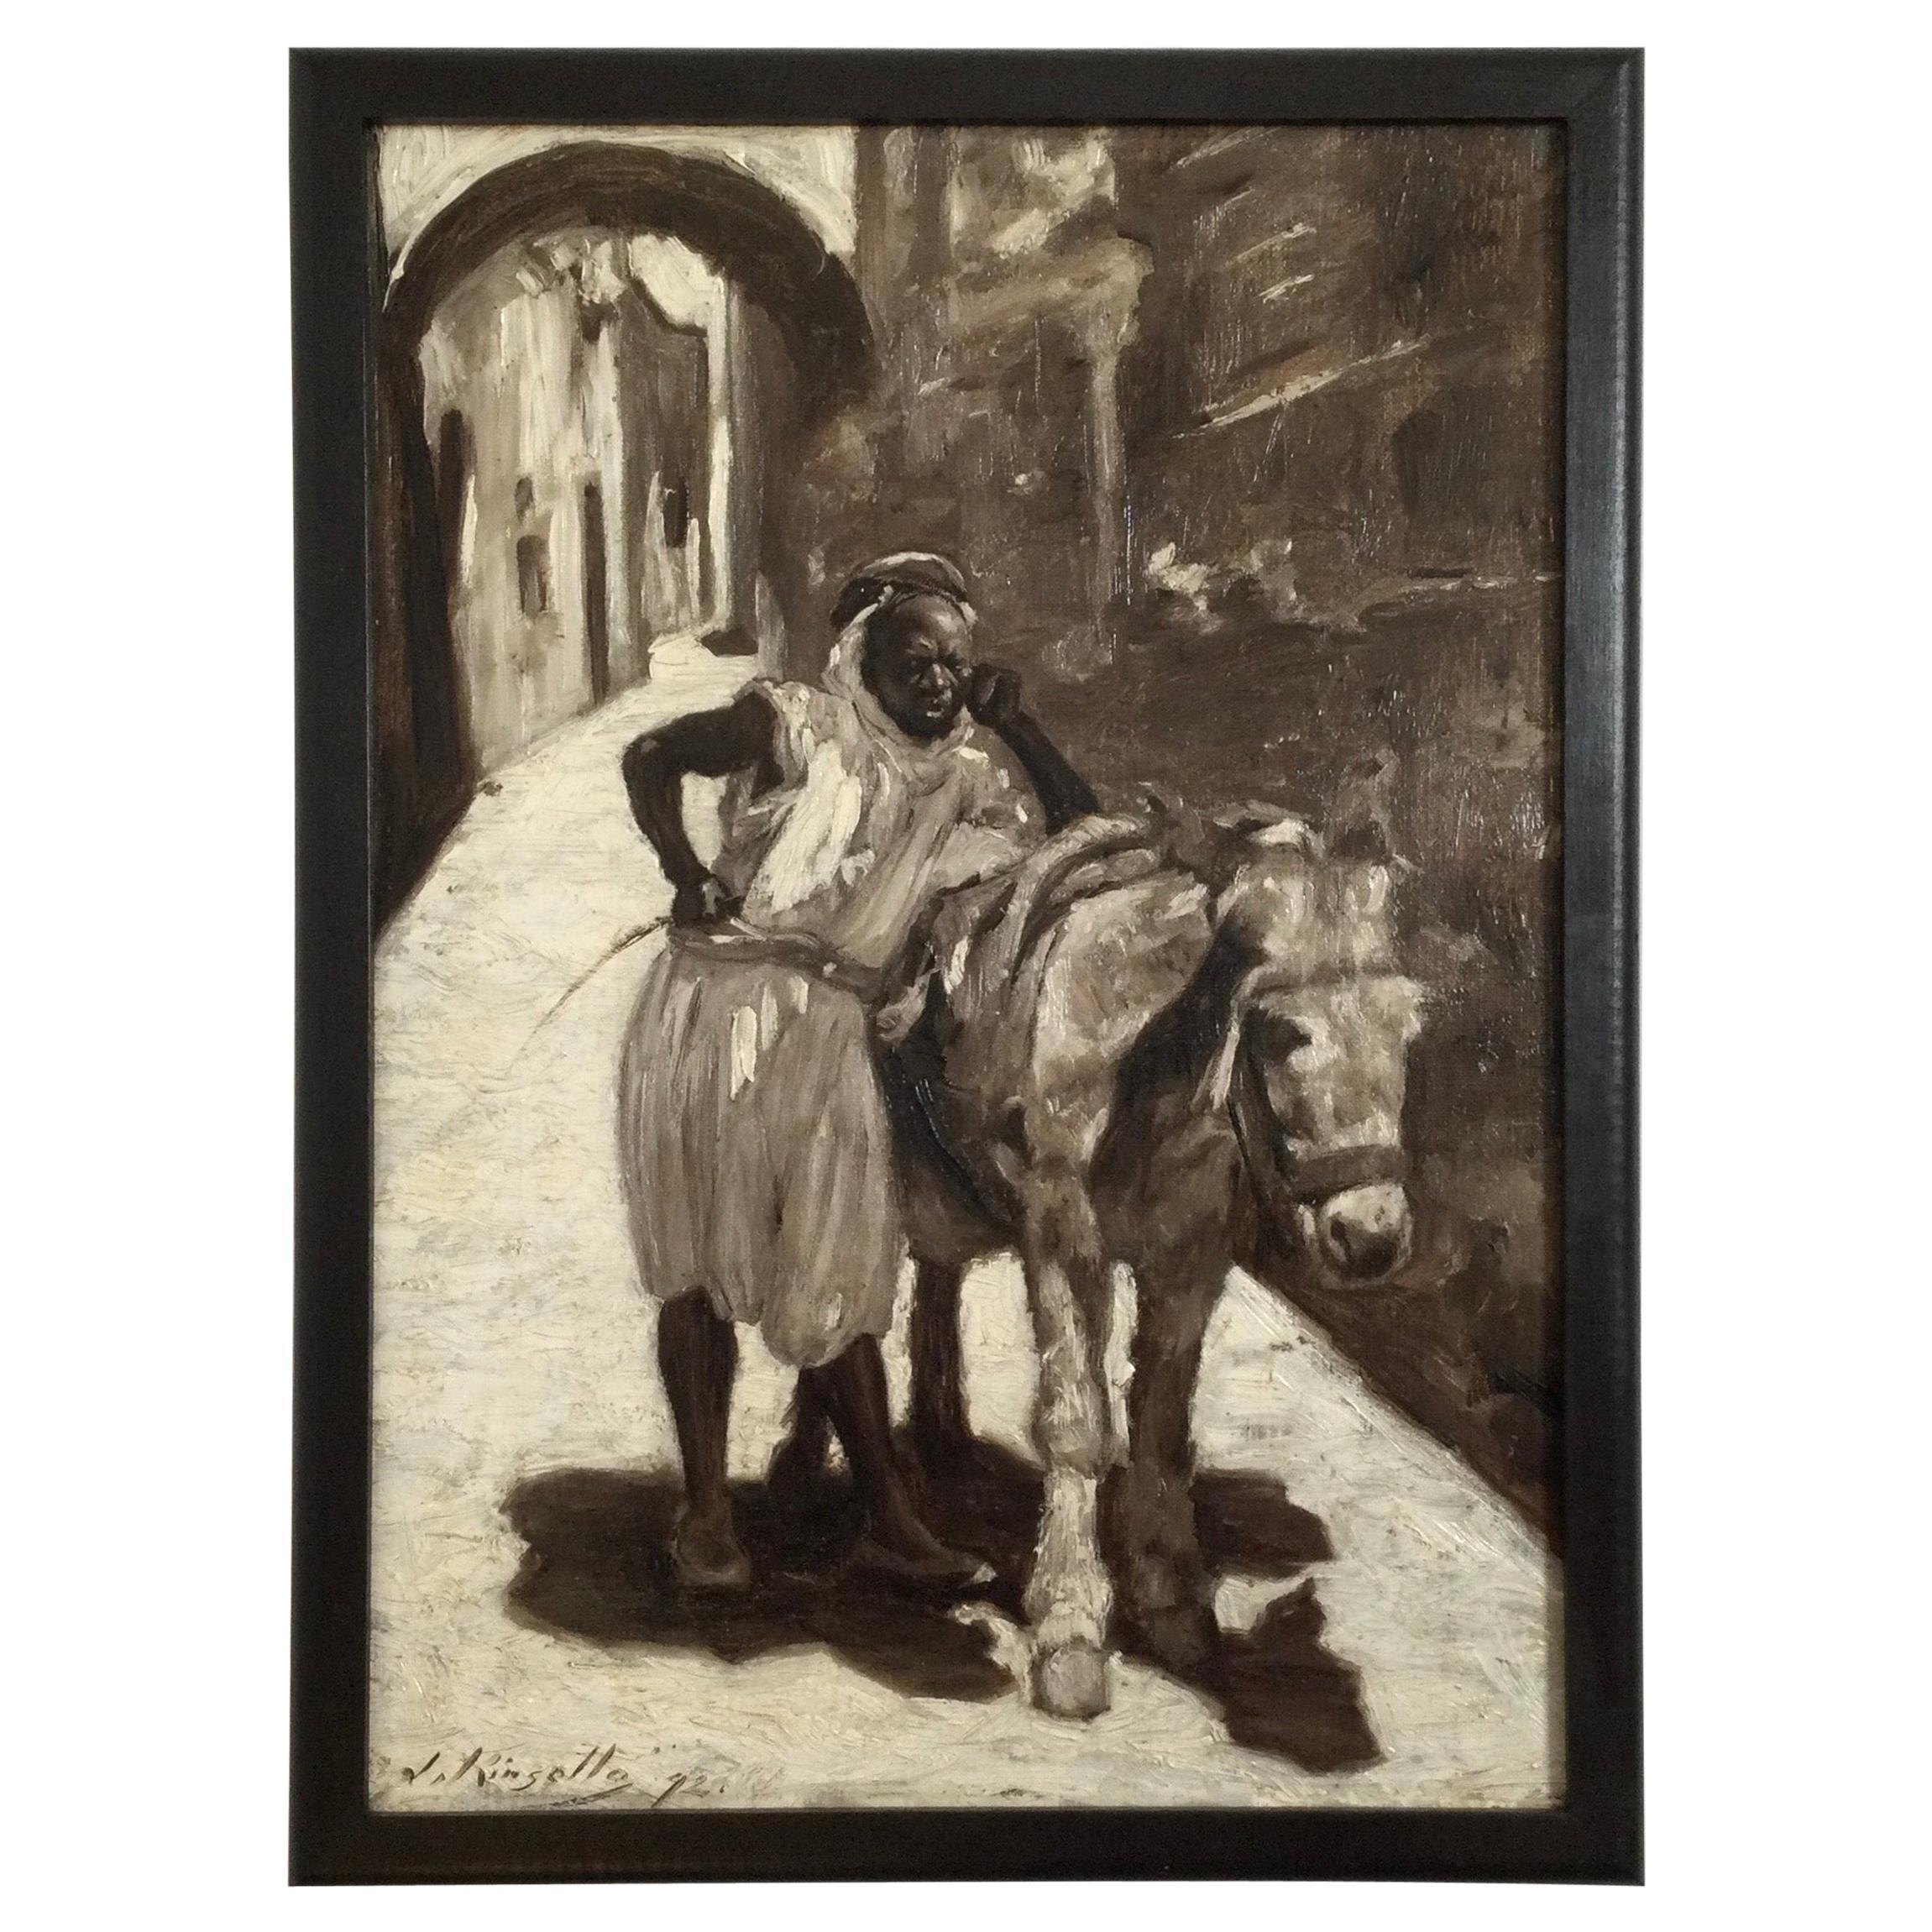 Monochrome Orientalist Oil Painting Titled High Noon Signed James Kinsella